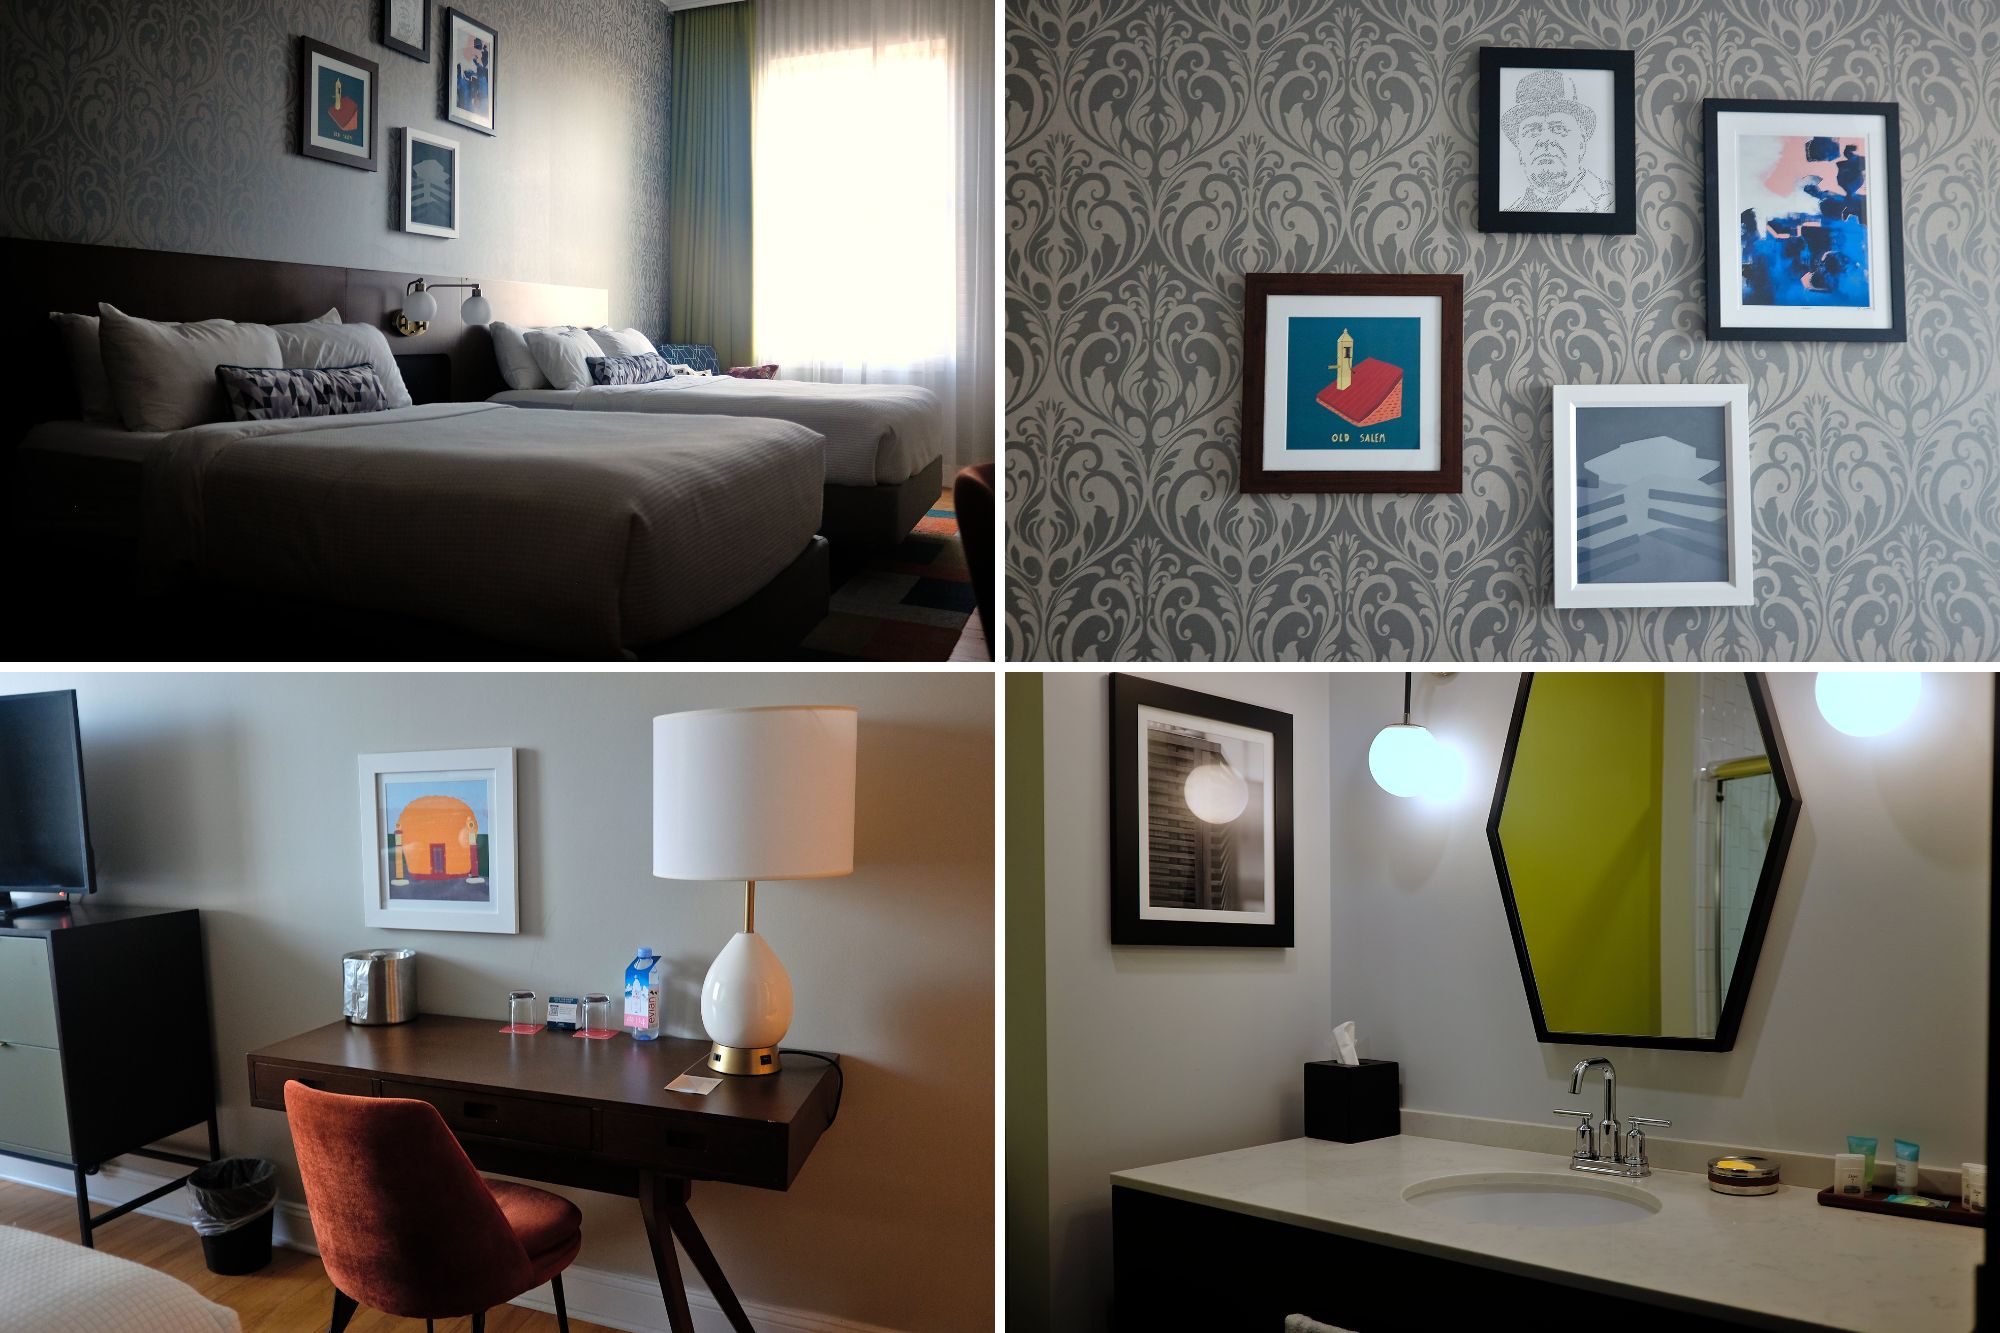 Images of the room at Hotel Indigo